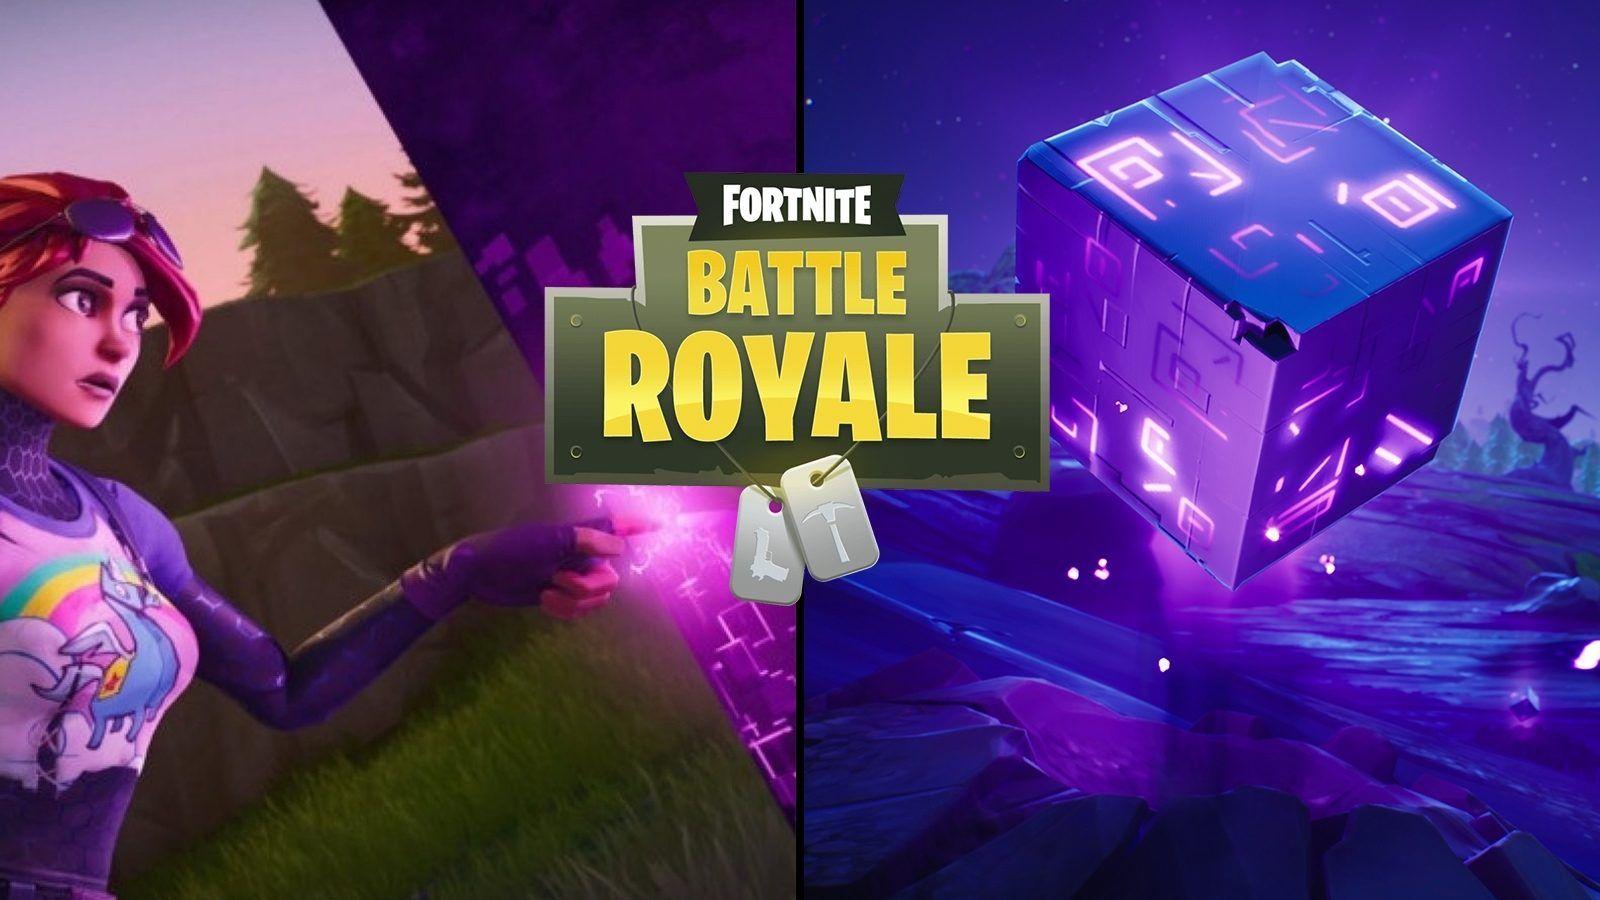 Leaked files claim Fortnite's Kevin the Cube is about to break apart